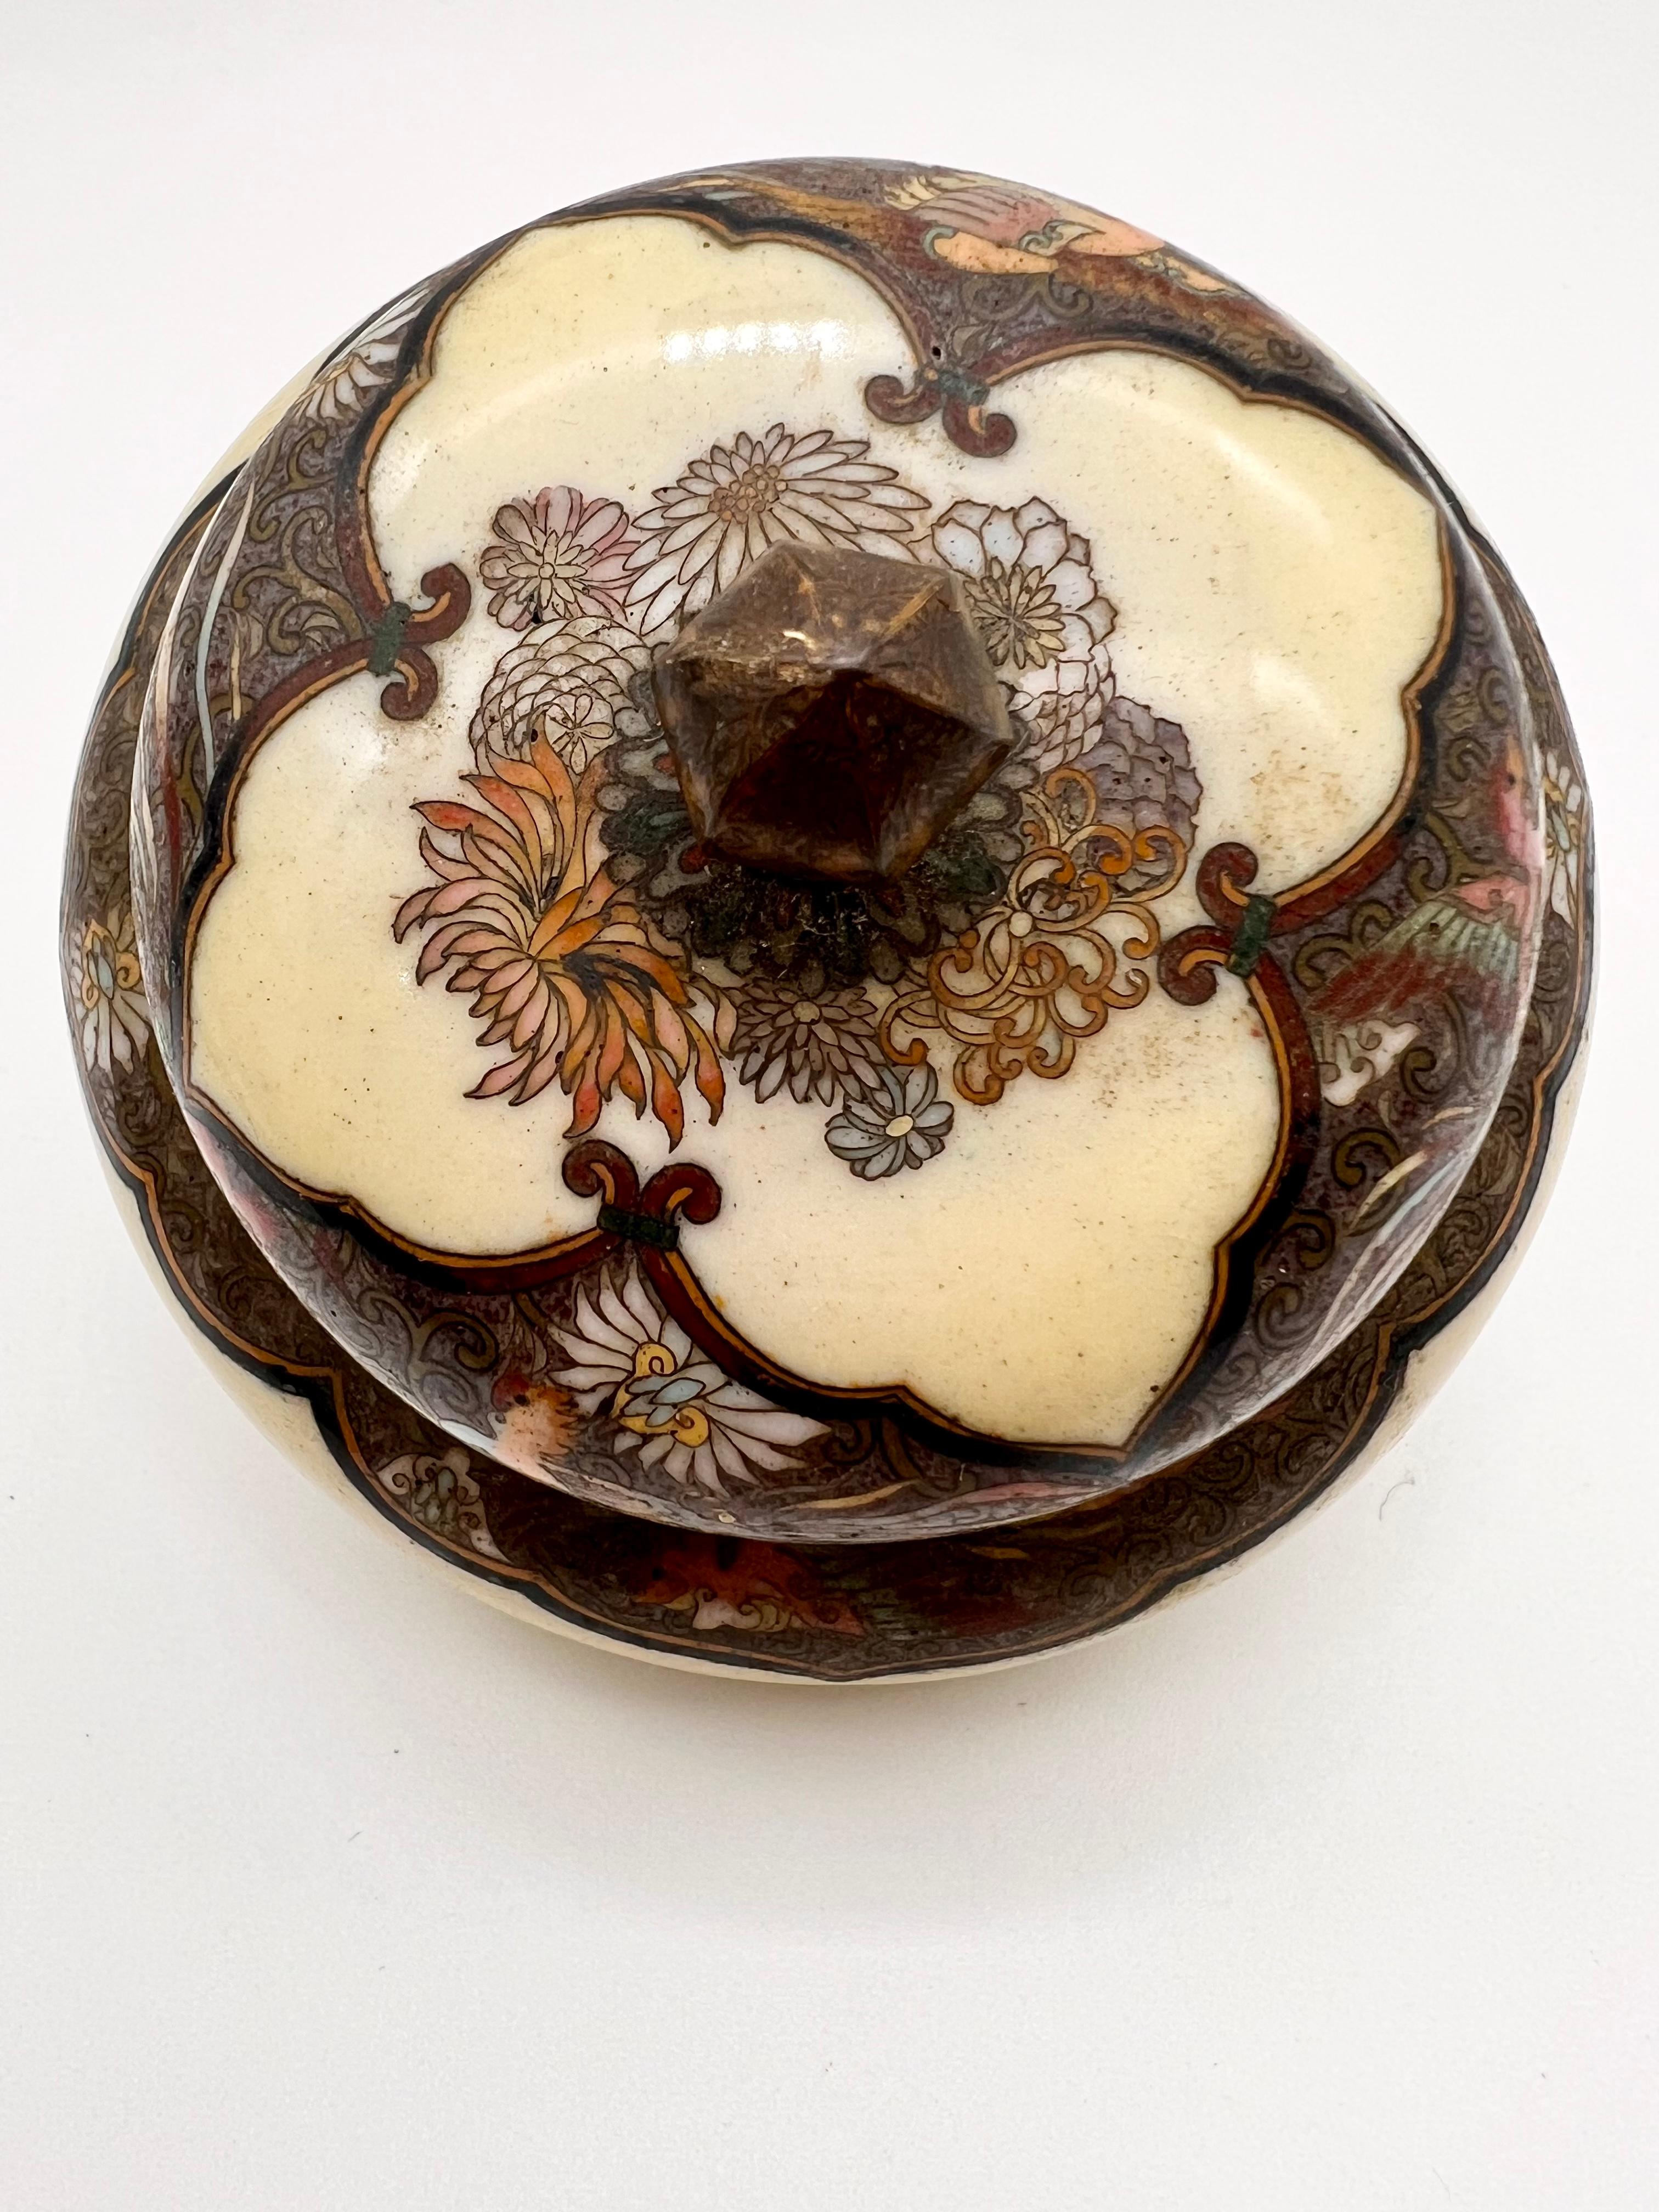 Exquisite Cloisonné Enamel Vase and Cover in the Manner of Namikawa Yasuyuki For Sale 9